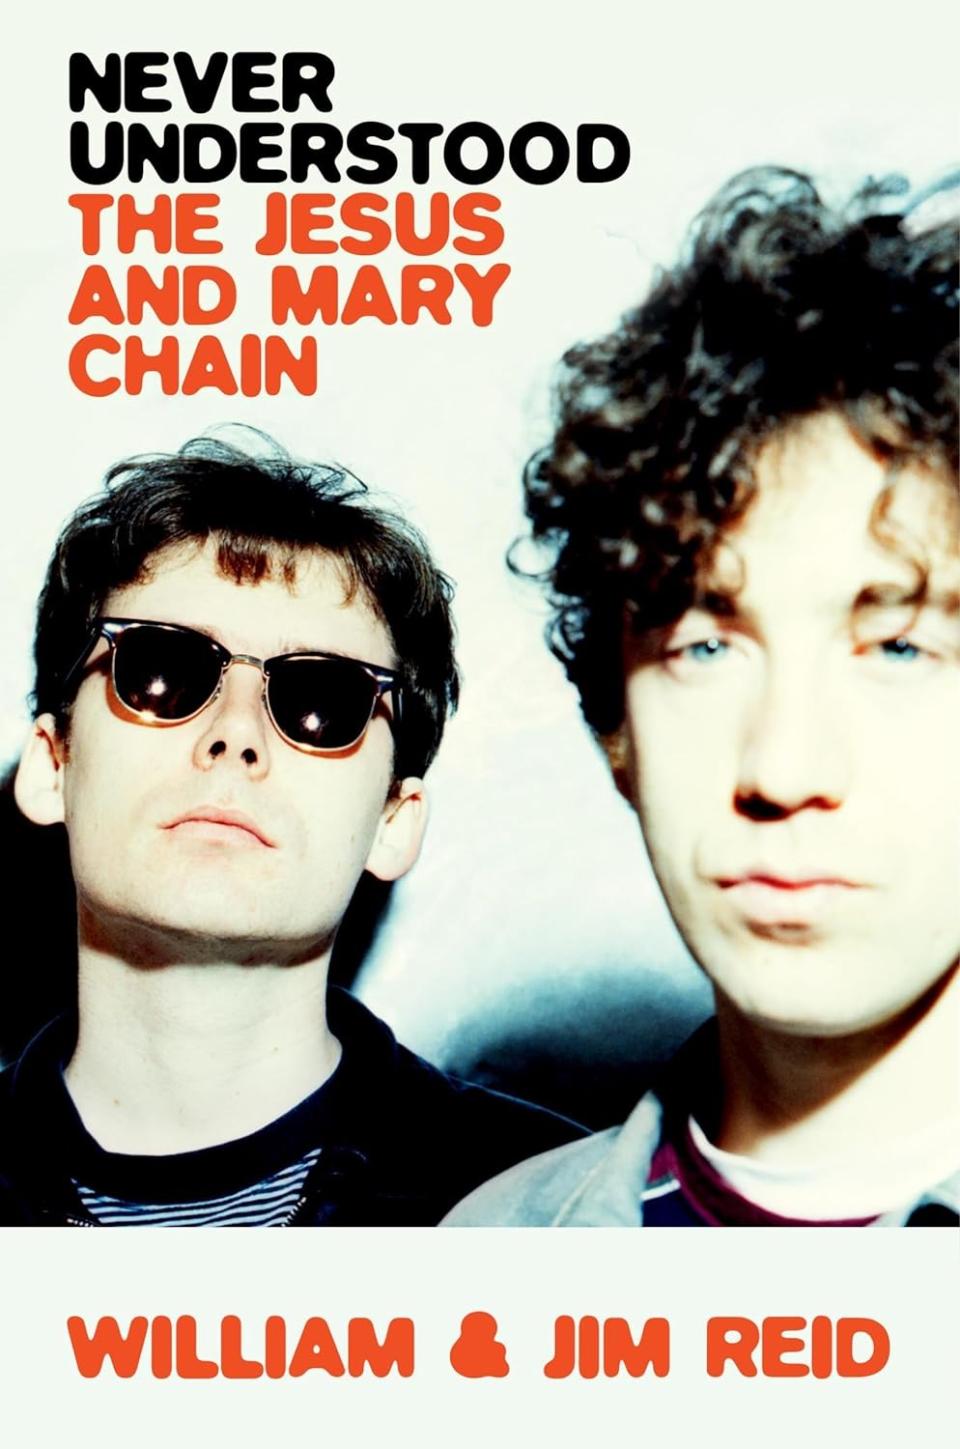 Never Understood: The Story of the Jesus and Mary Chain